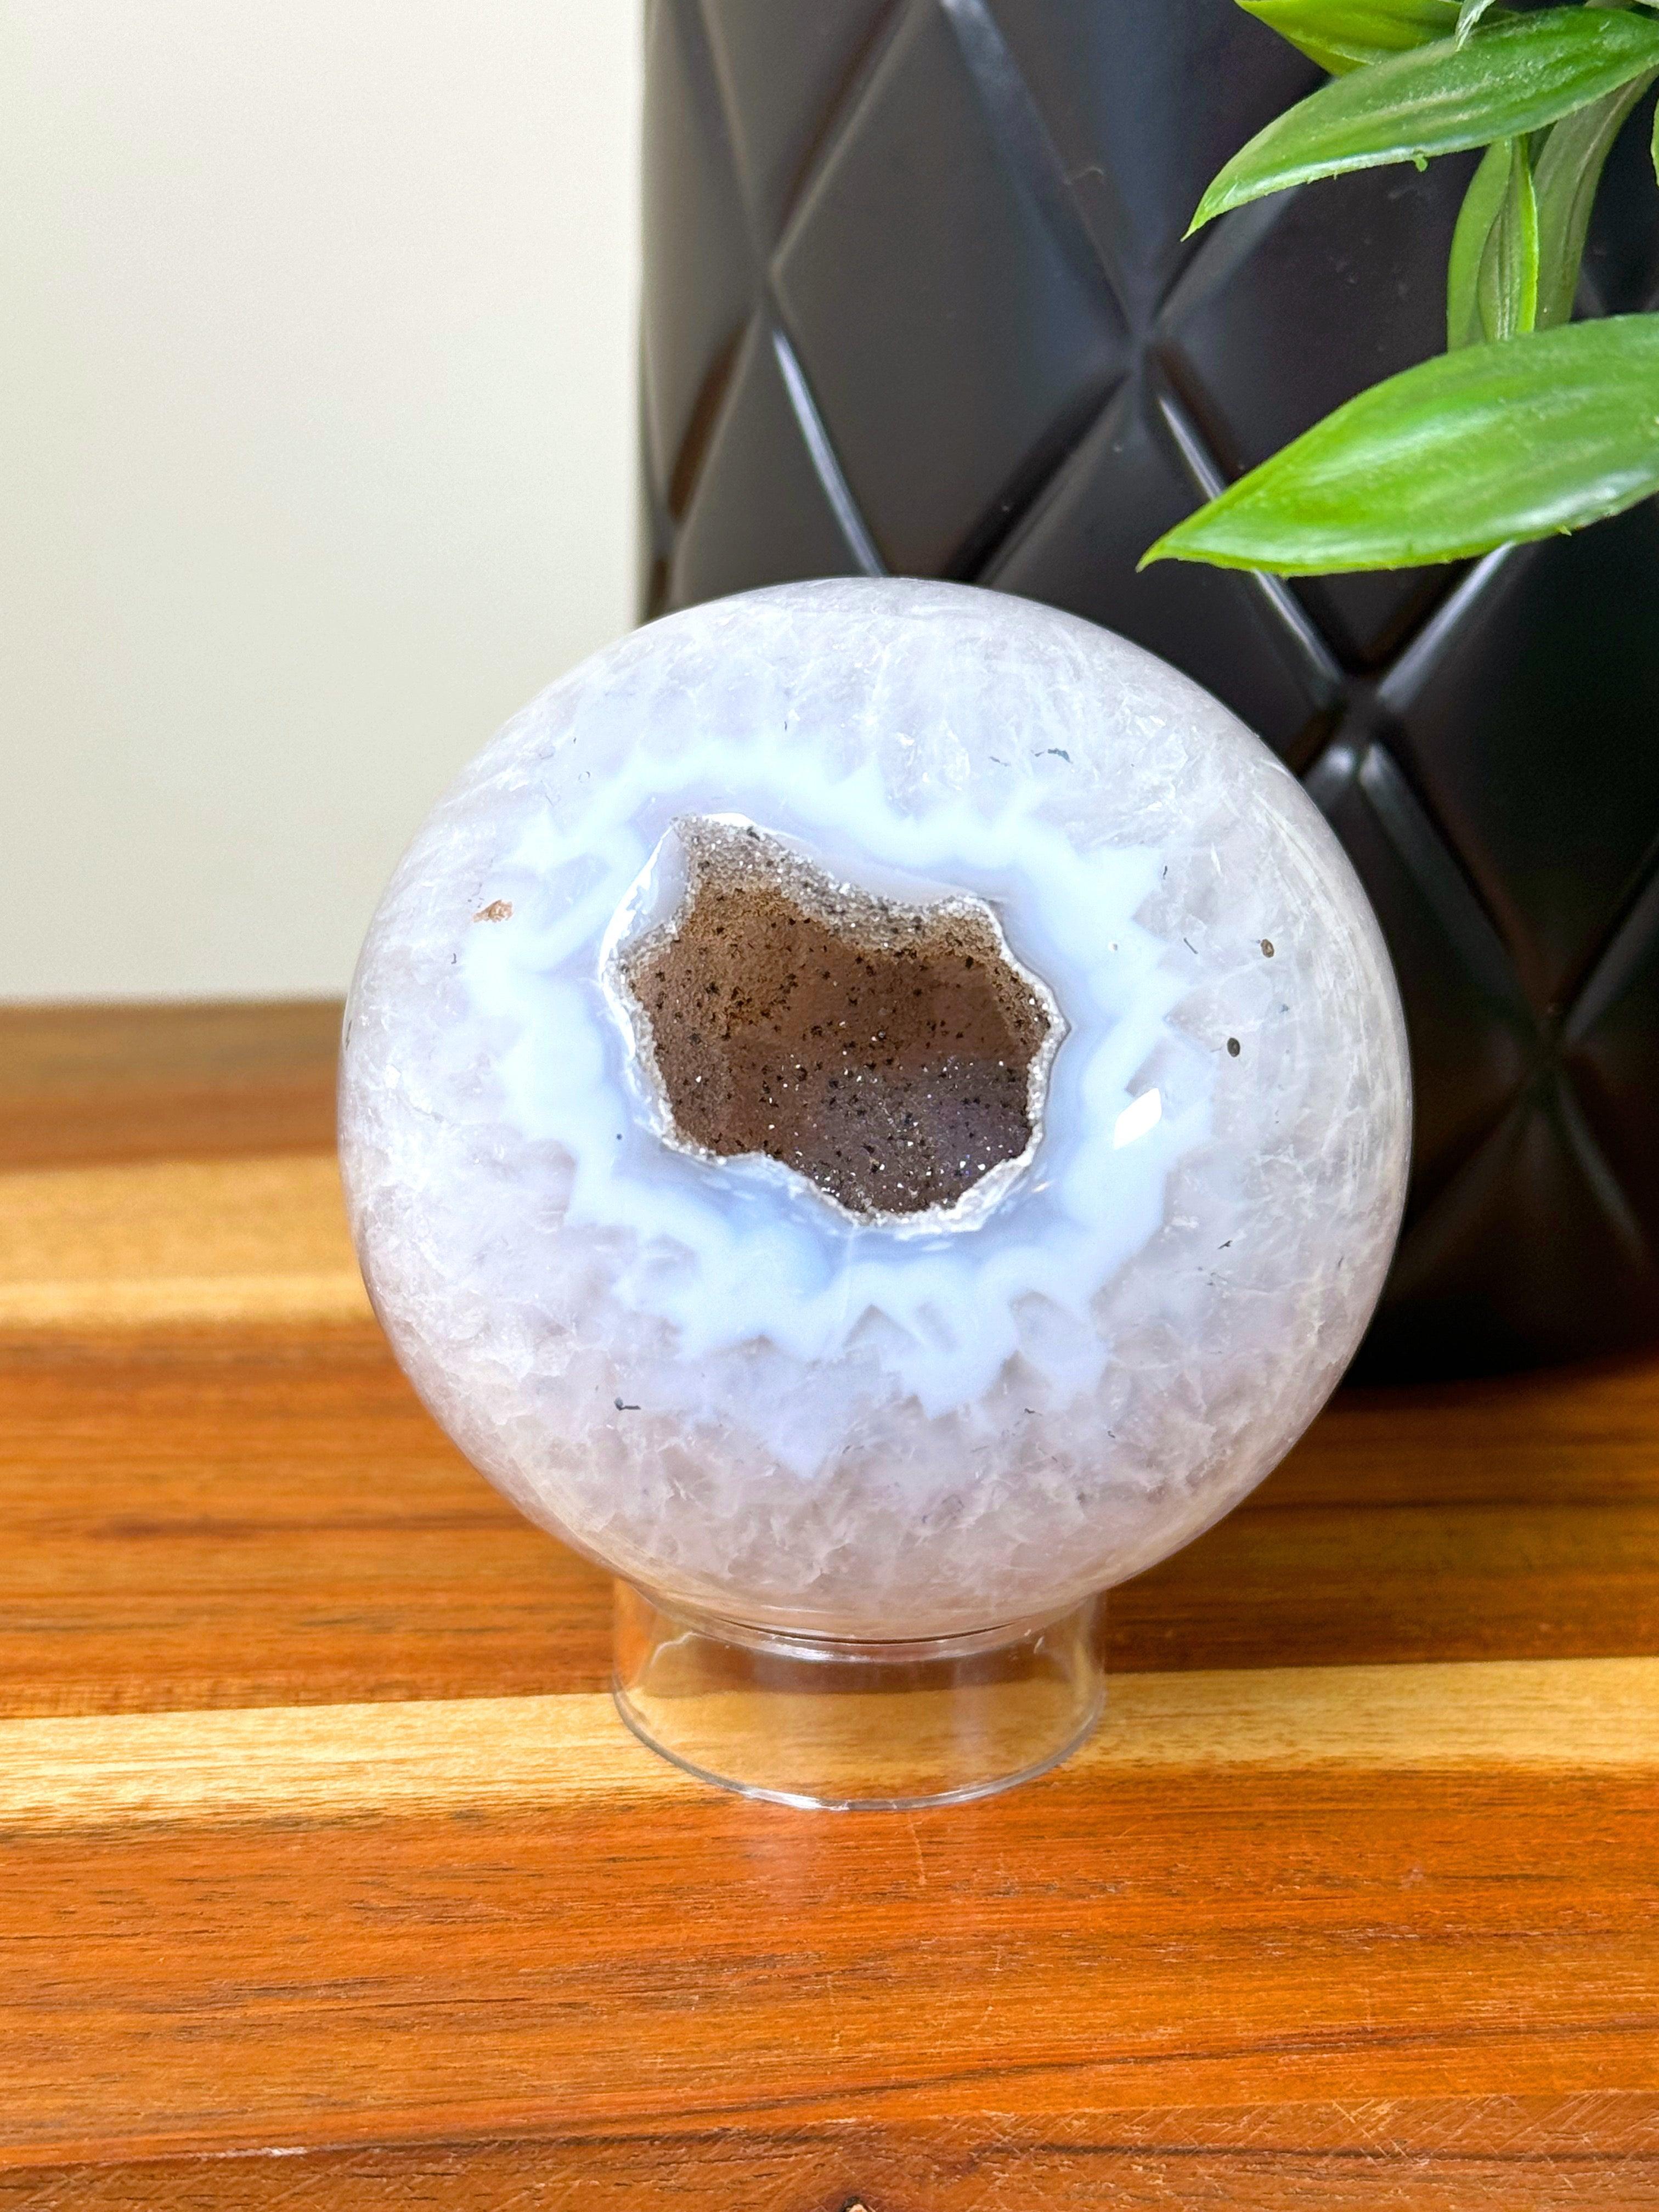 DRUZY AGATE SPHERE 18 - agate, druzy agate, googly agate, googly eye, googly eye agate, one of a kind, sphere, statement piece - The Mineral Maven